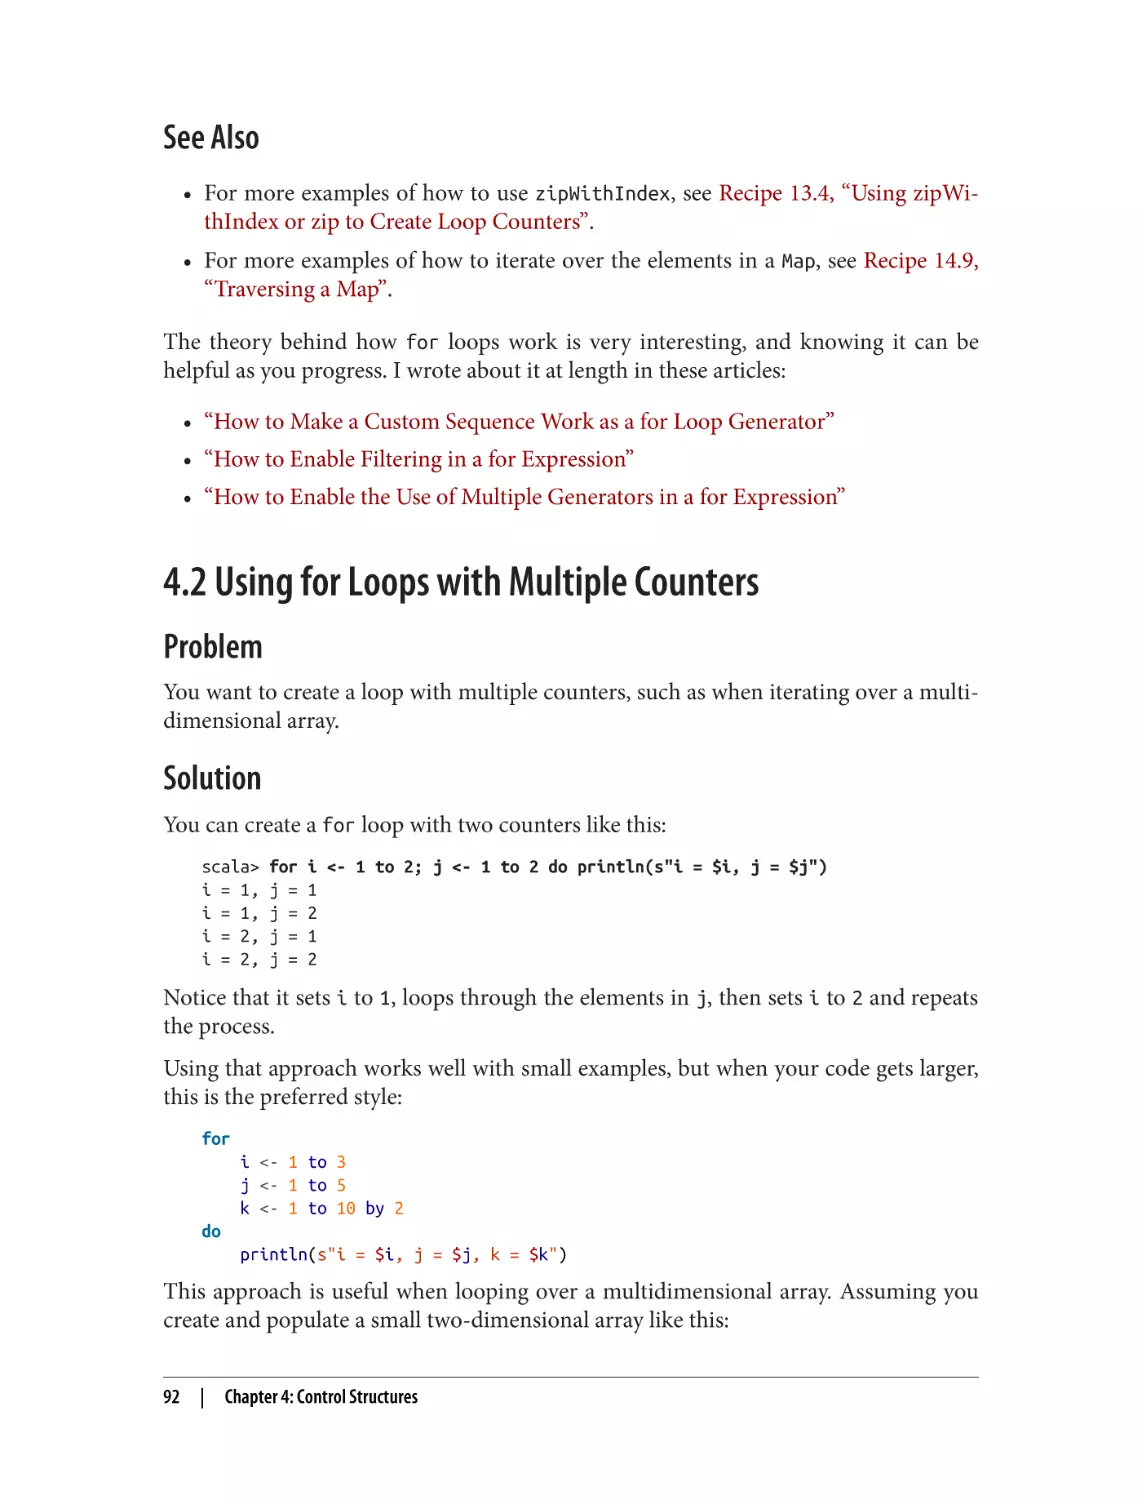 See Also
4.2 Using for Loops with Multiple Counters
Problem
Solution